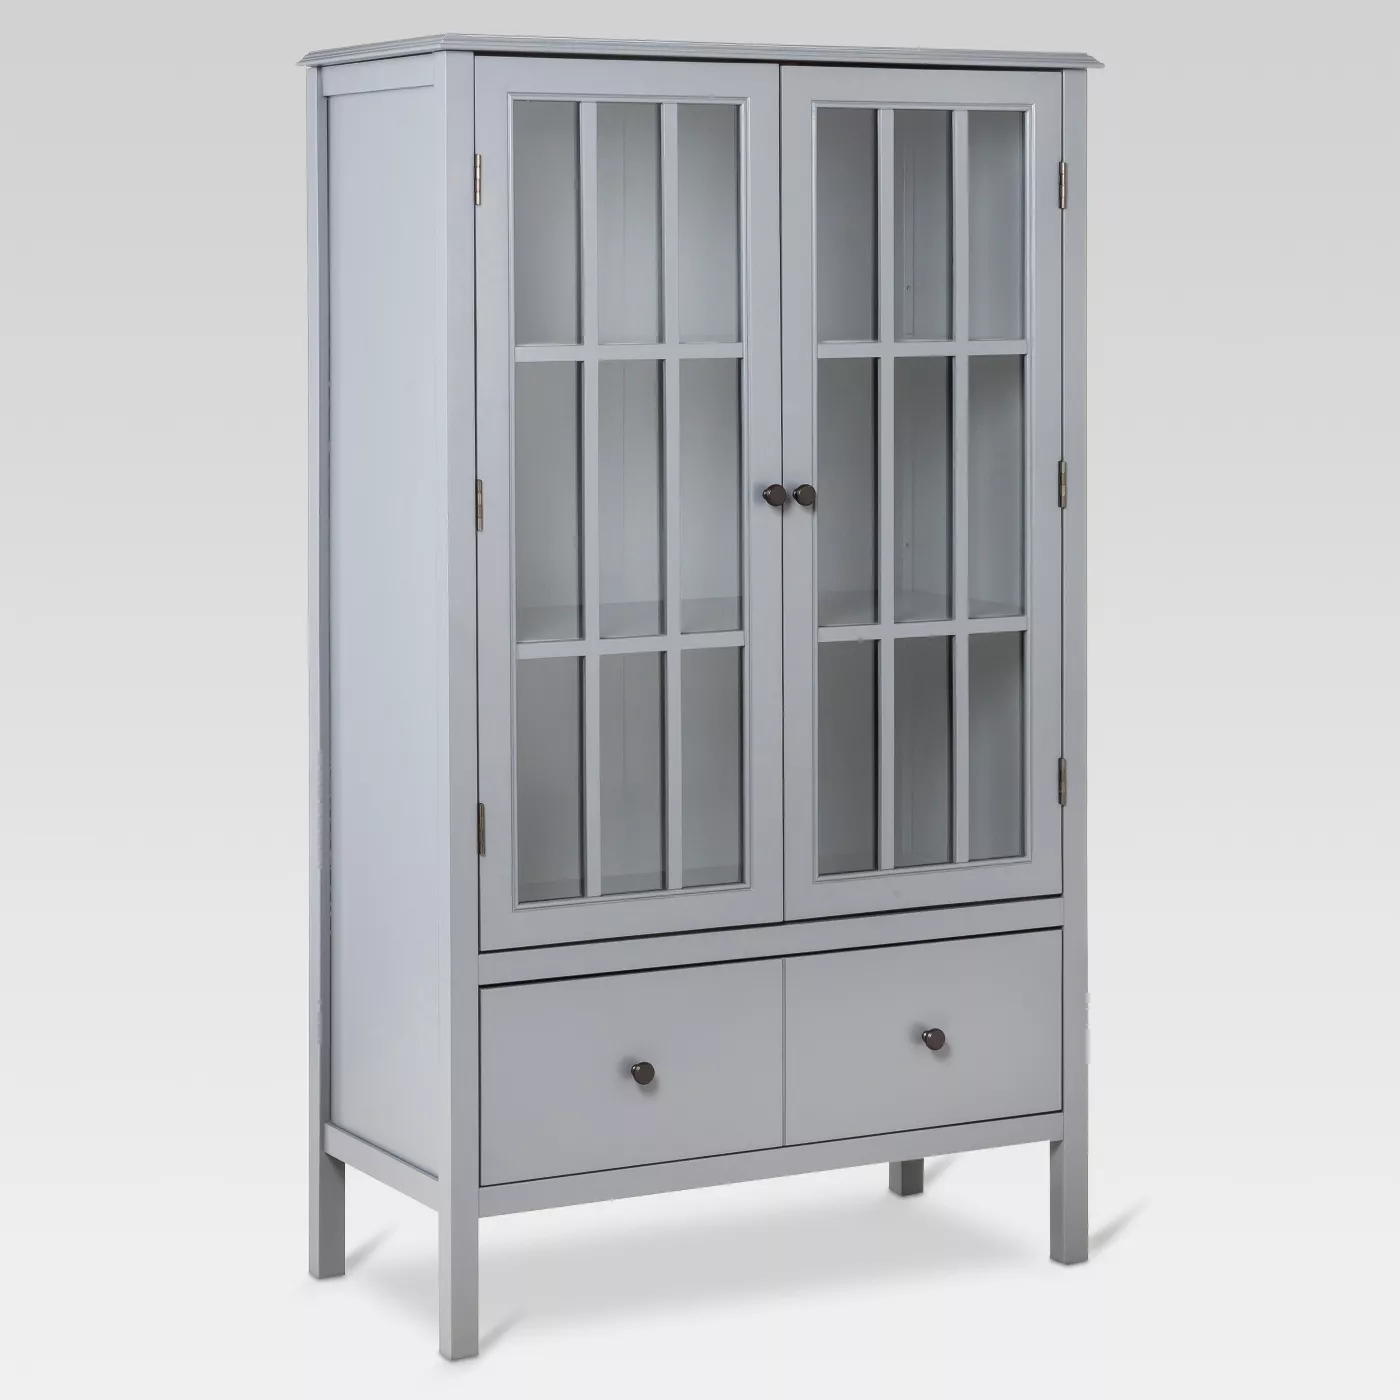 Windham Tall Cabinet with Drawer - Threshold™ - image 1 of 8